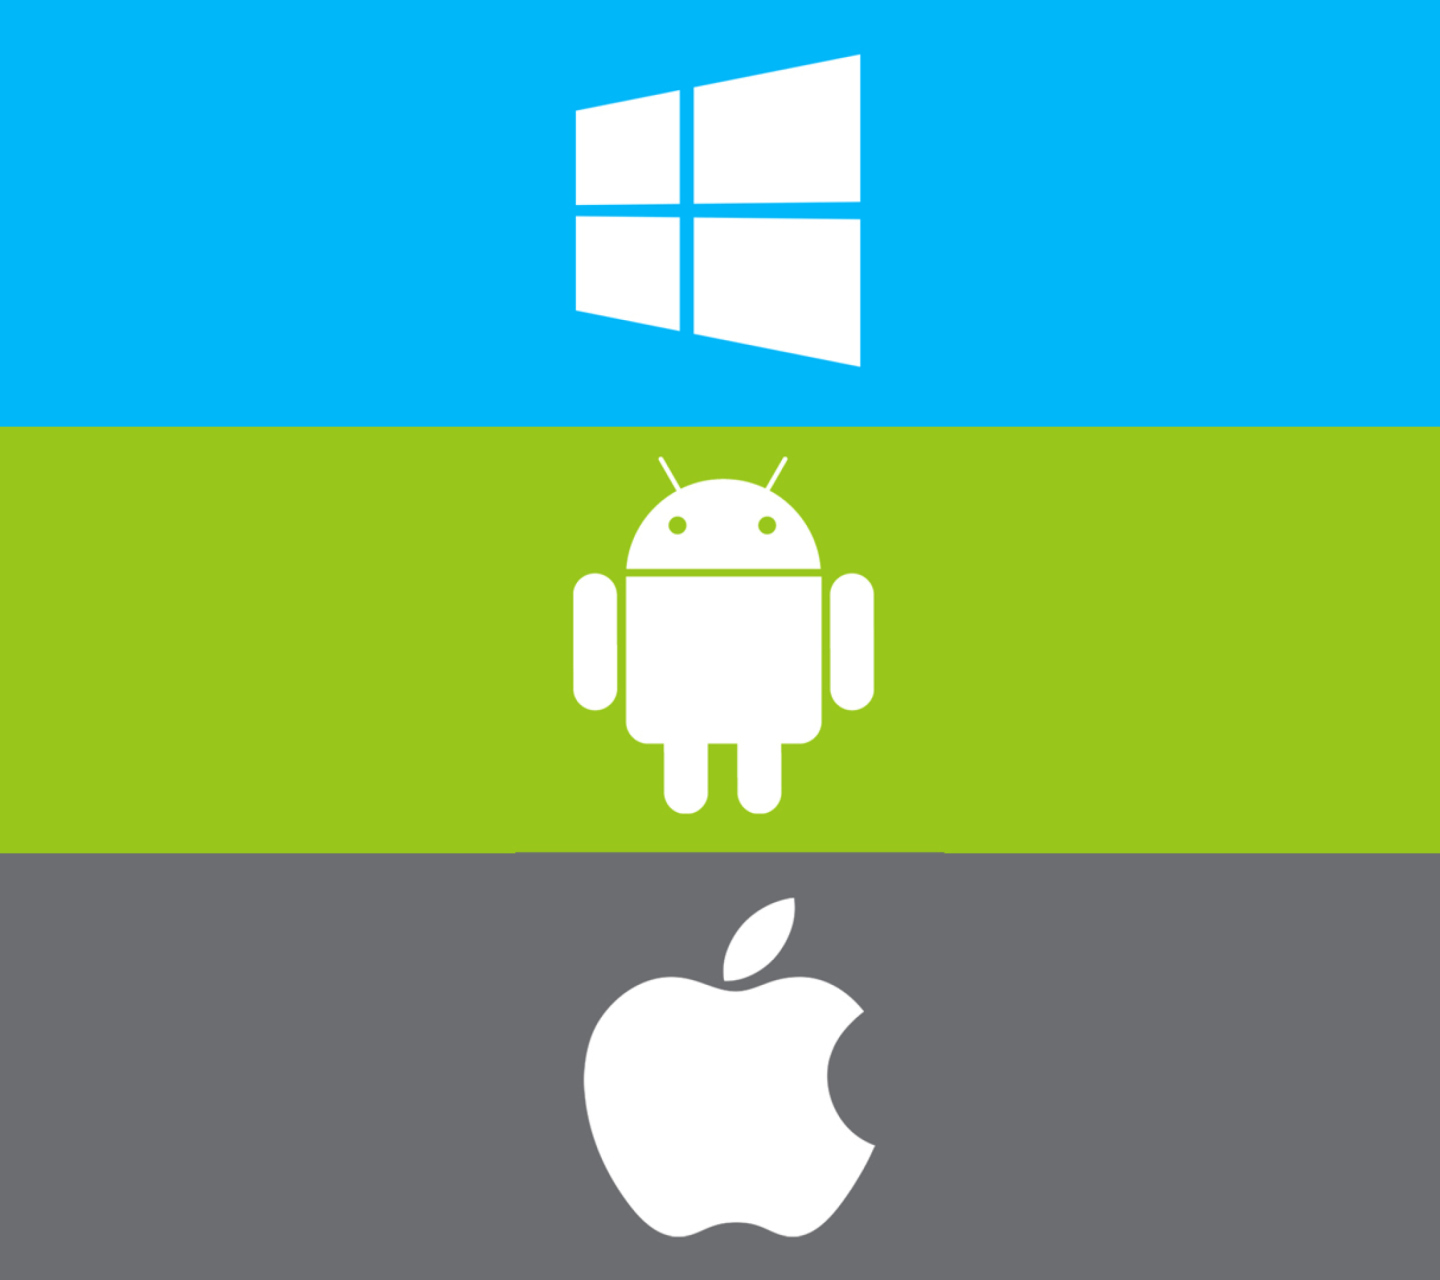 Das Windows, Apple, Android - What's Your Choice? Wallpaper 1440x1280